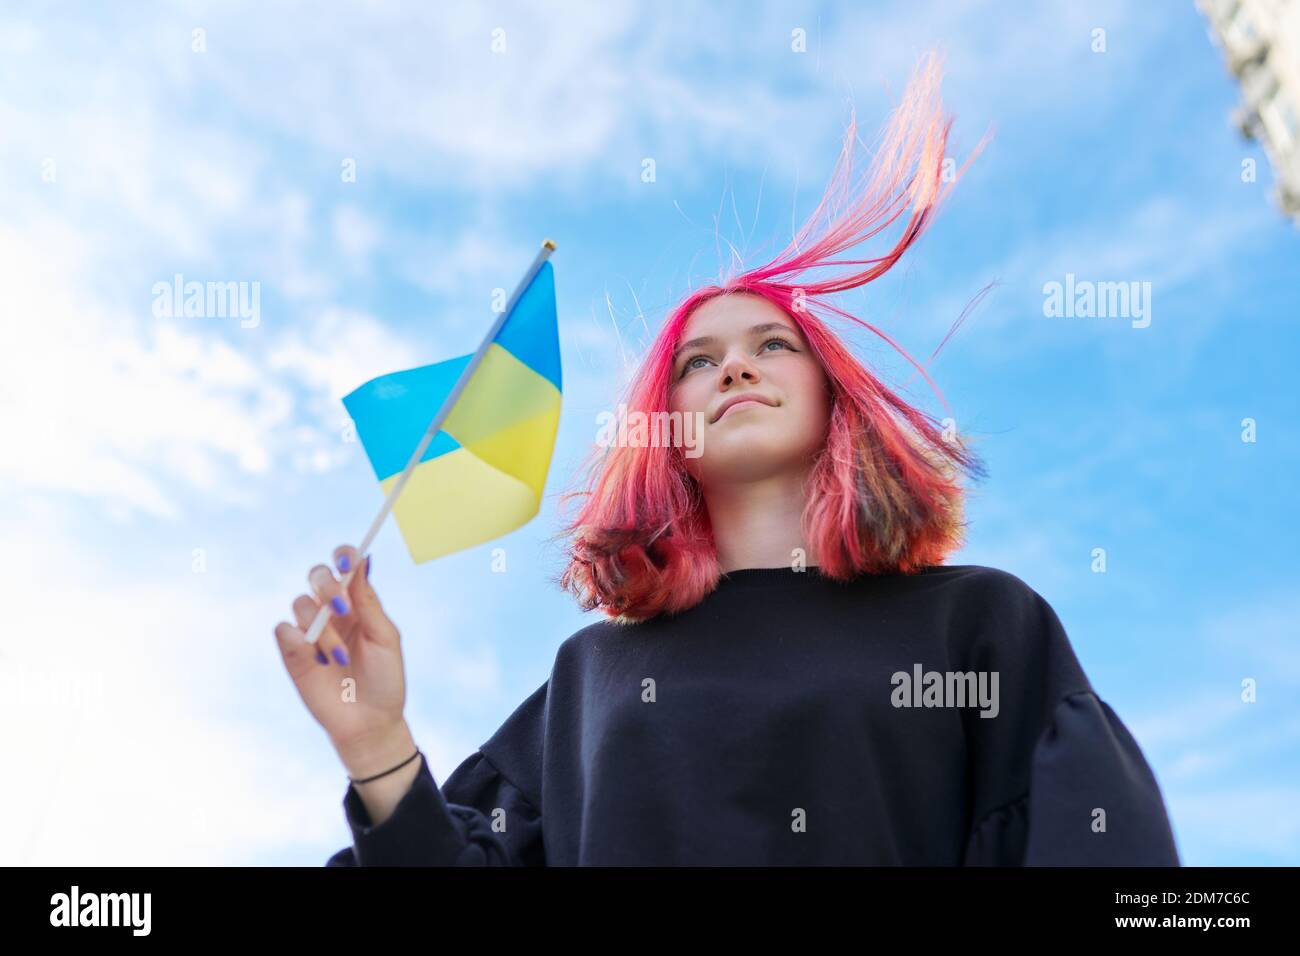 Female student teenager with Ukraine flag, blue sky with clouds background Stock Photo